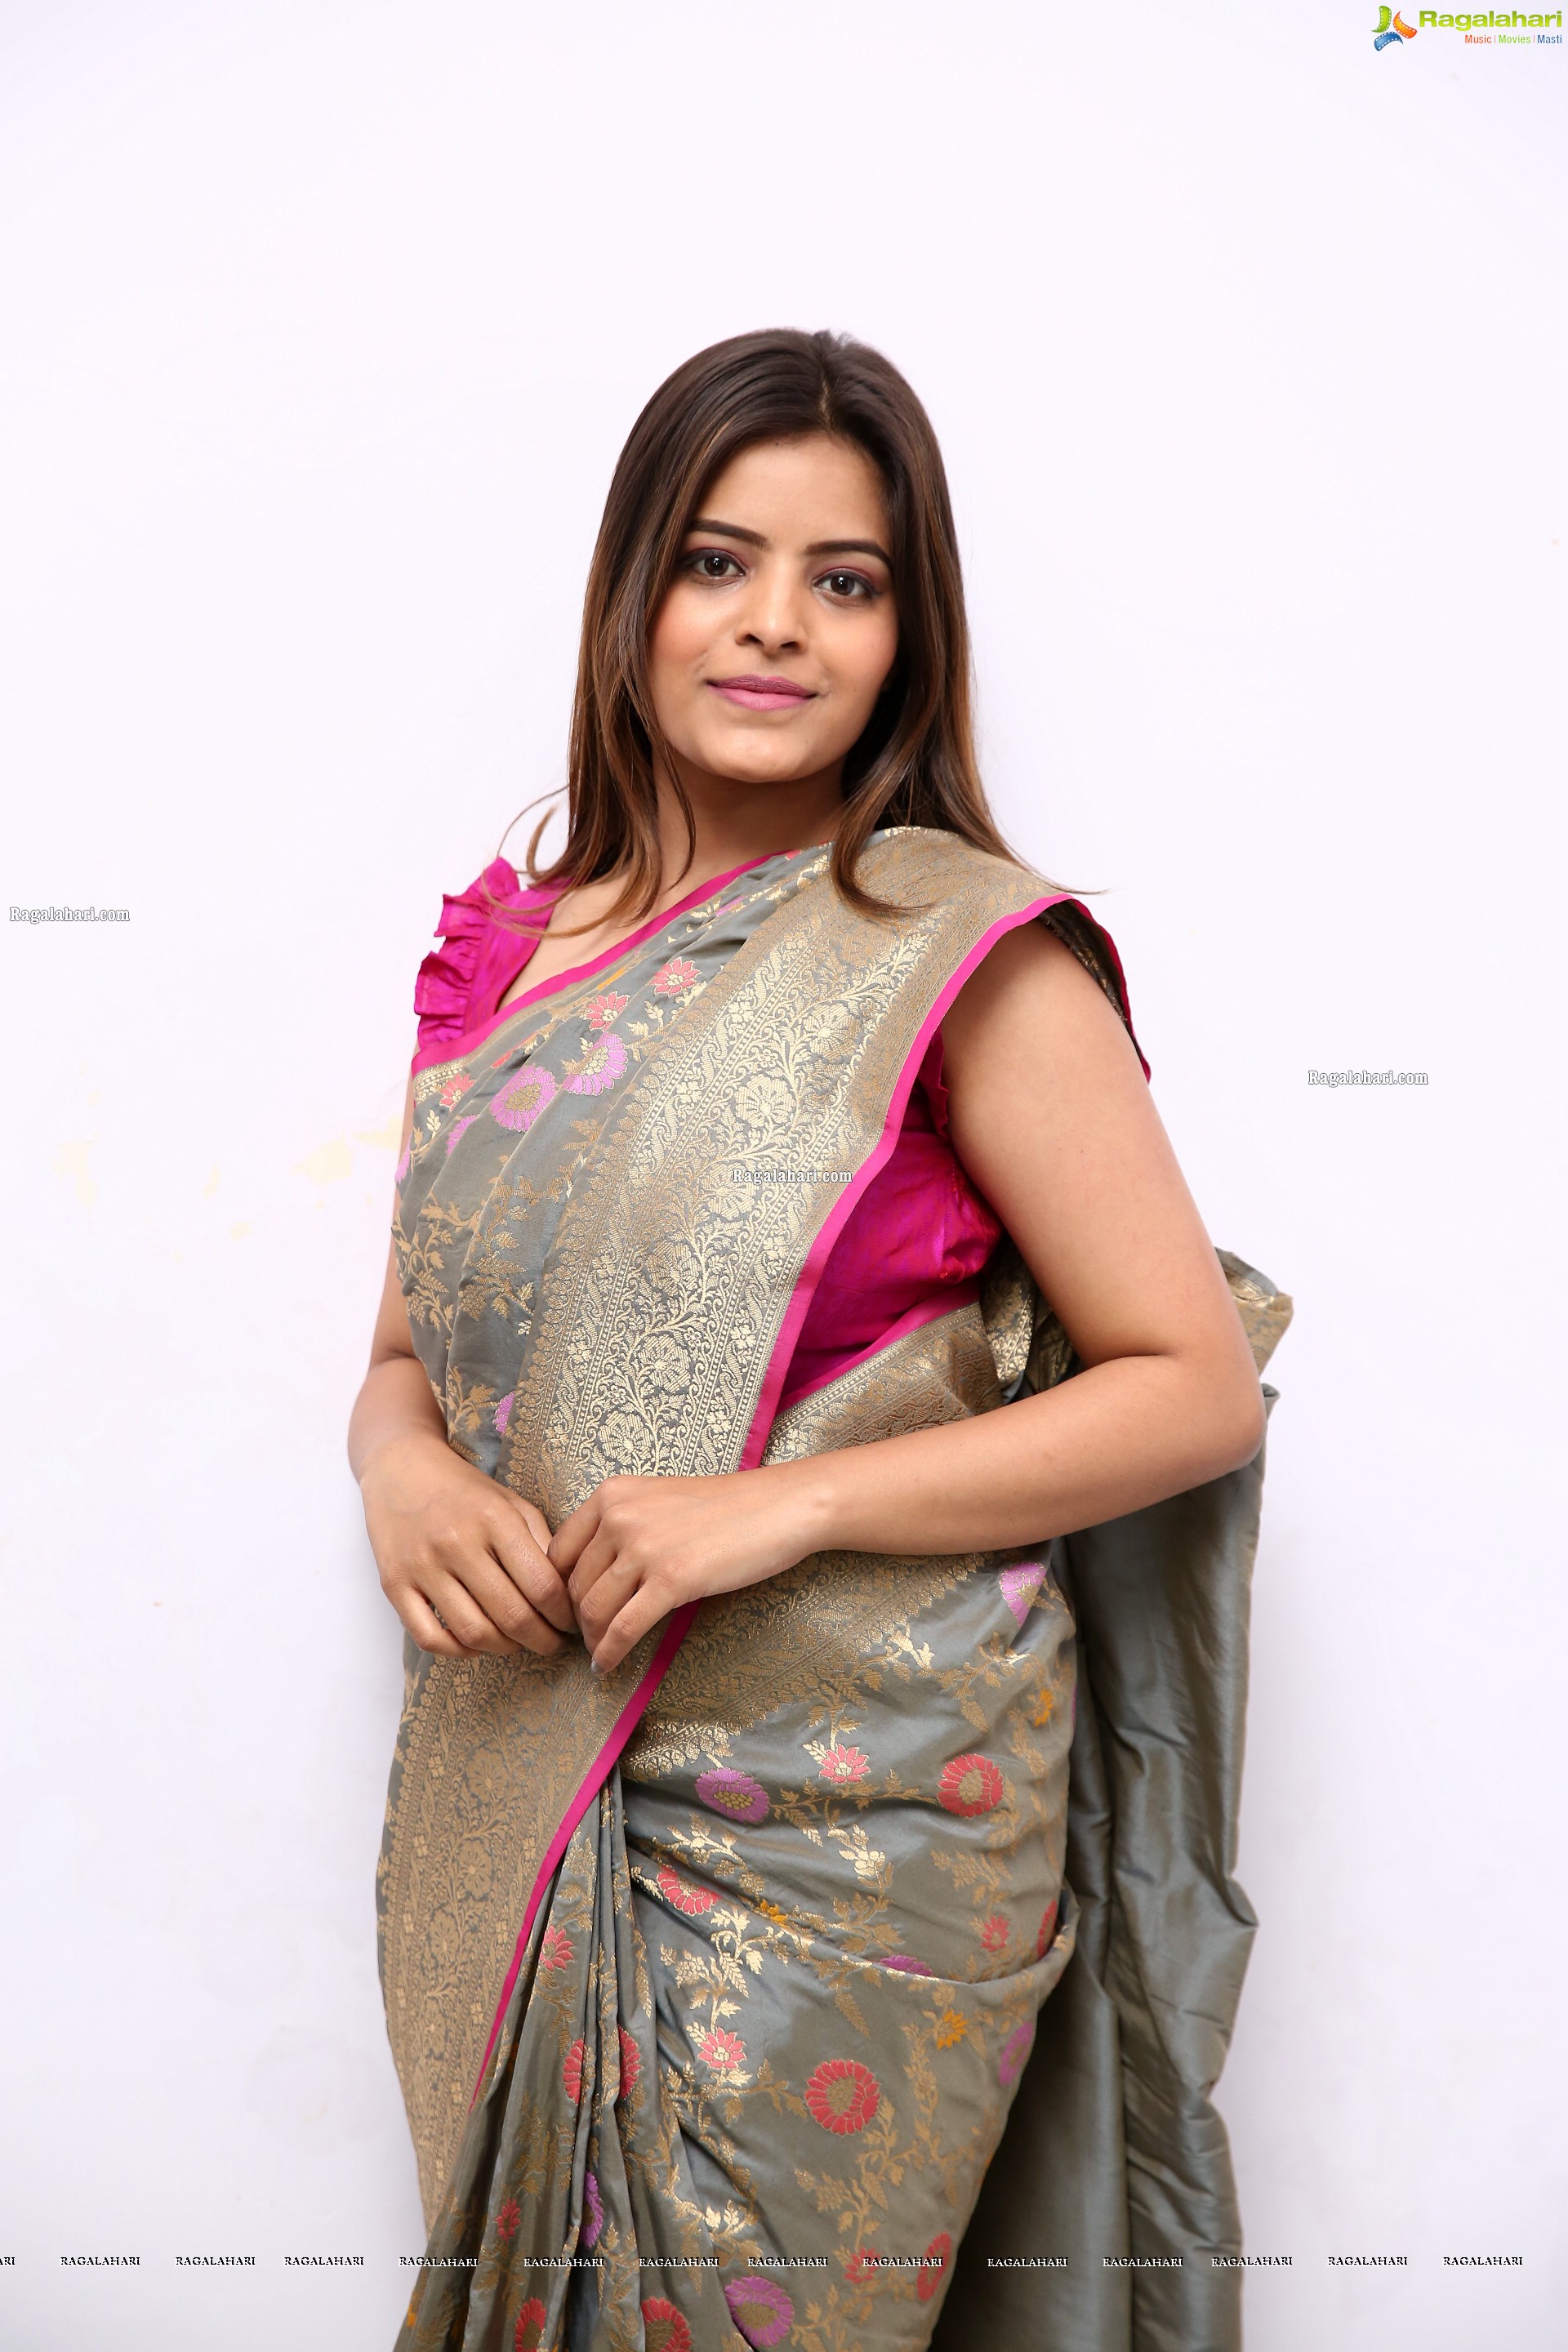 Kusumm in Traditional Saree, HD Photo Gallery